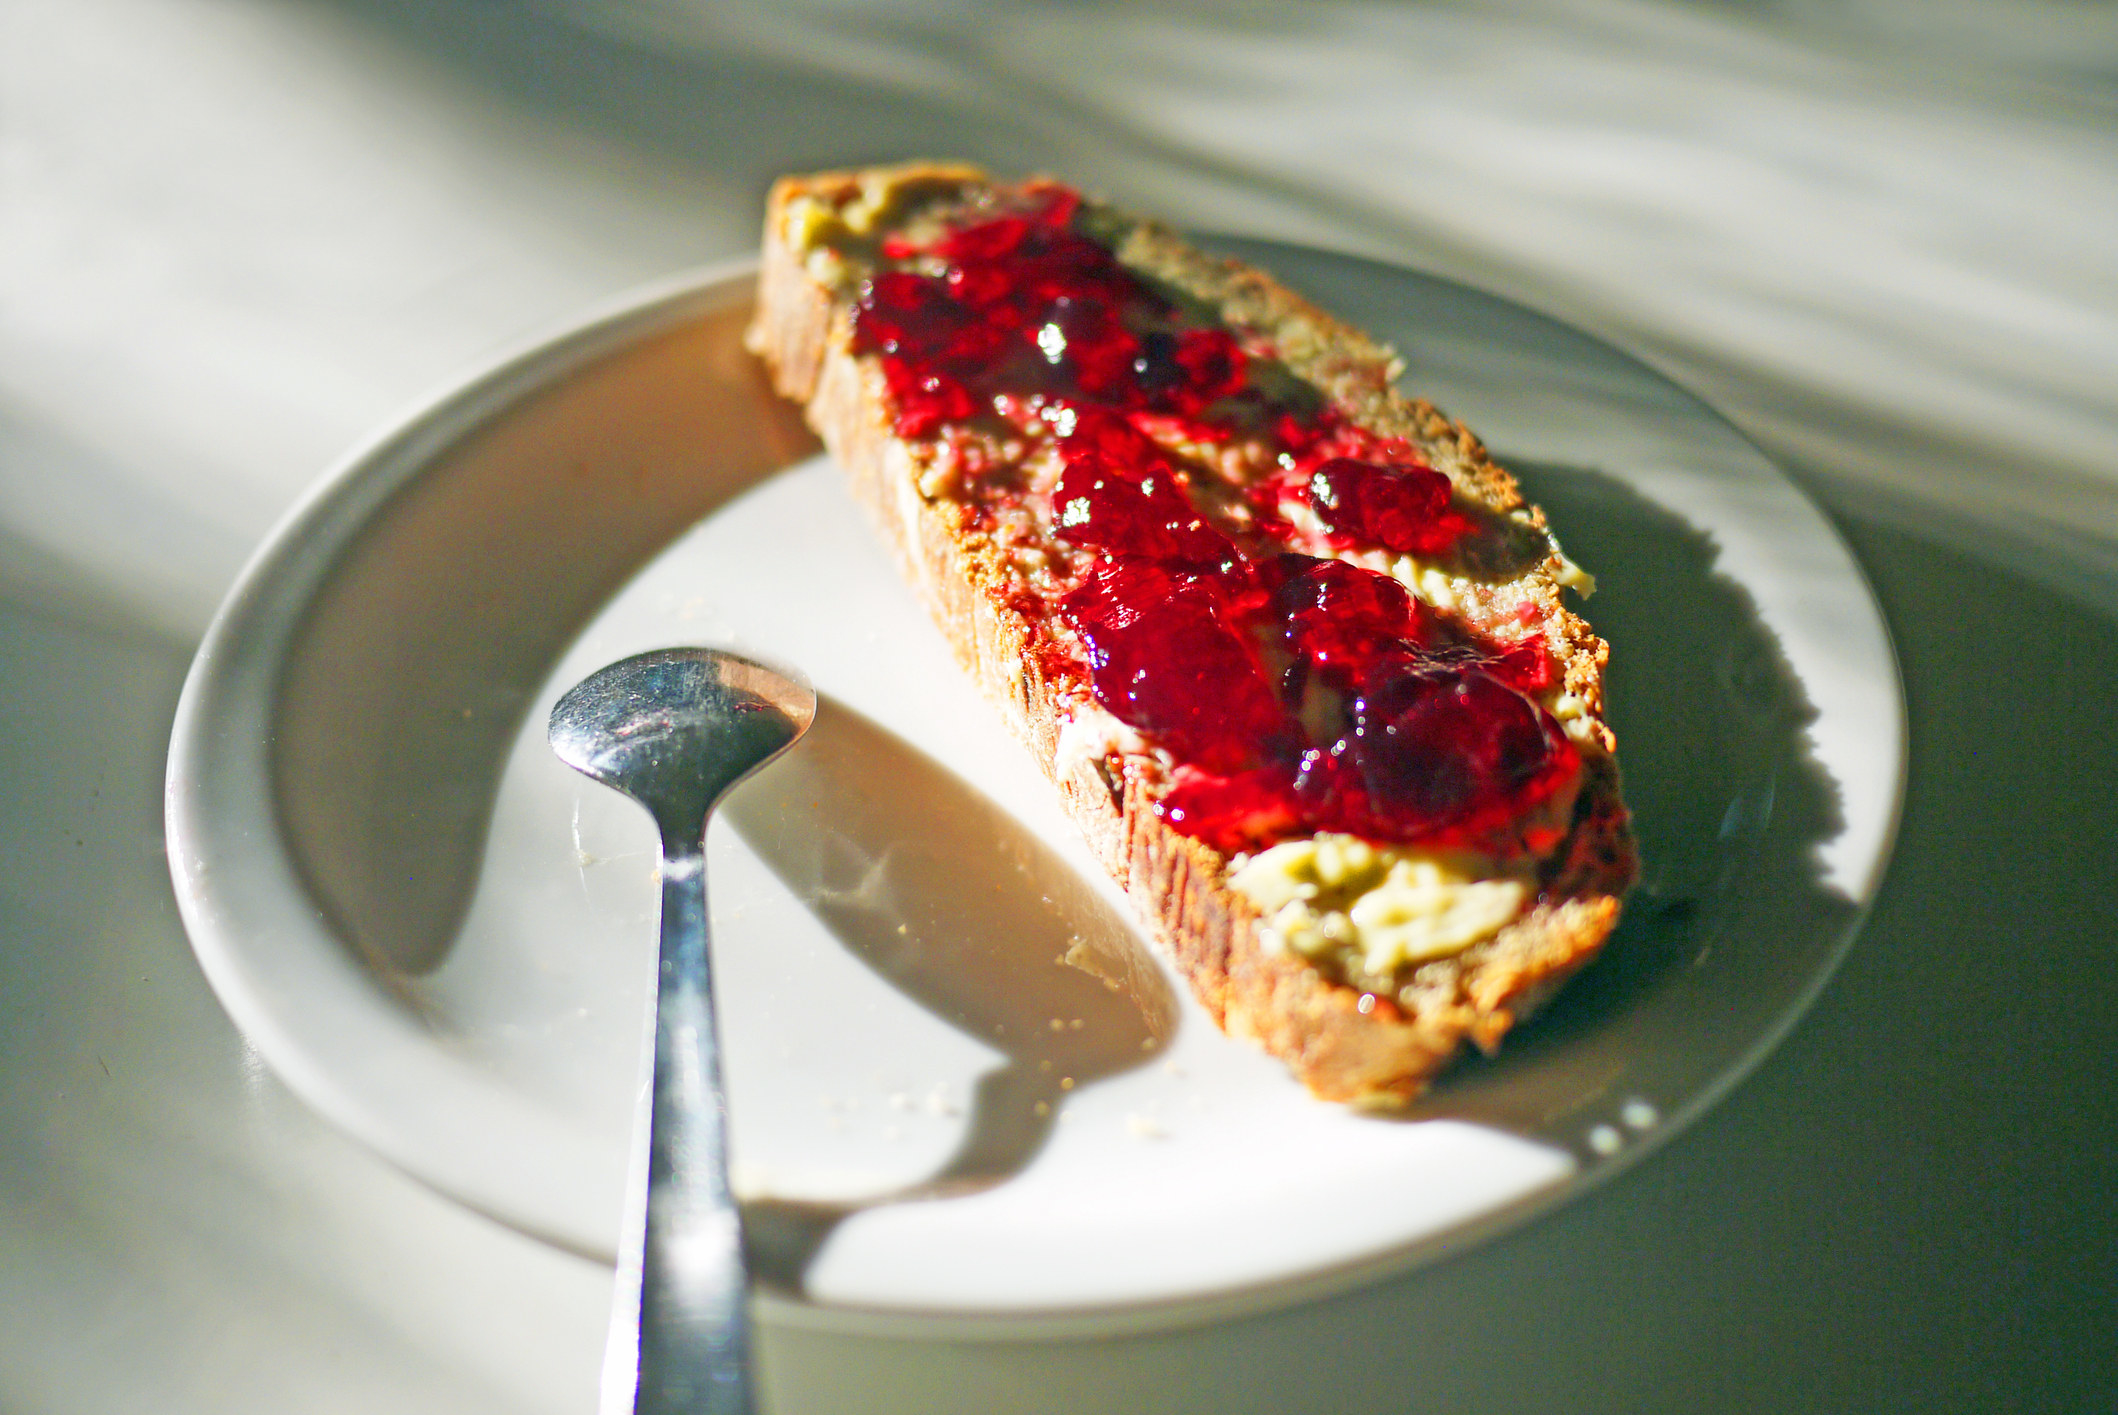 A slice of bread with jam.